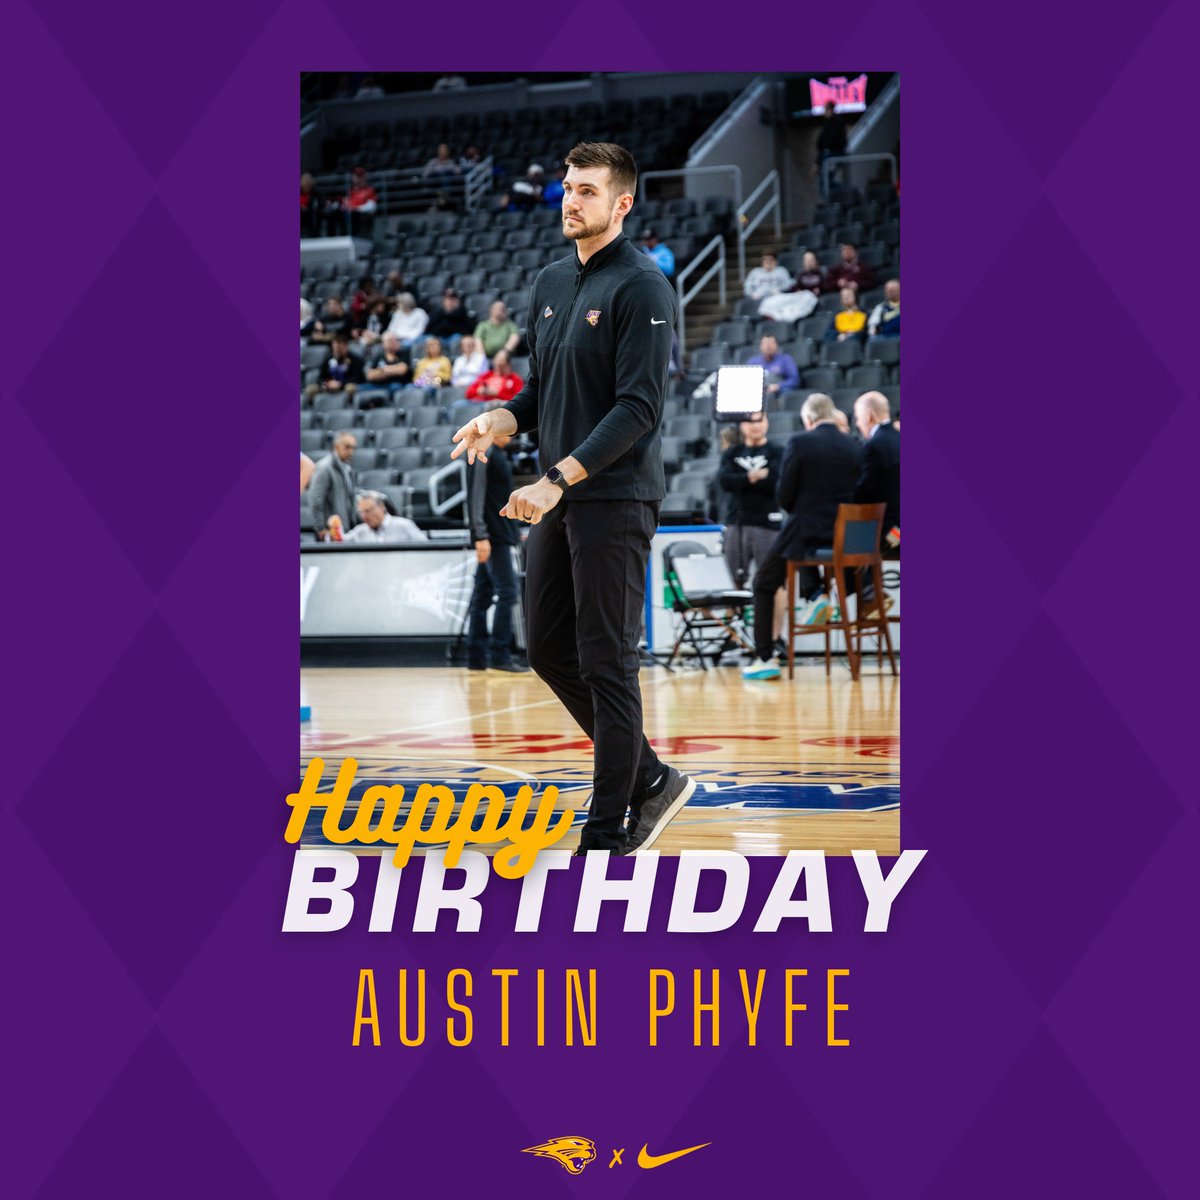 Panther Nation, join us in wishing Austin Phyfe a happy birthday today! Have a great day Phyfe!! #Family